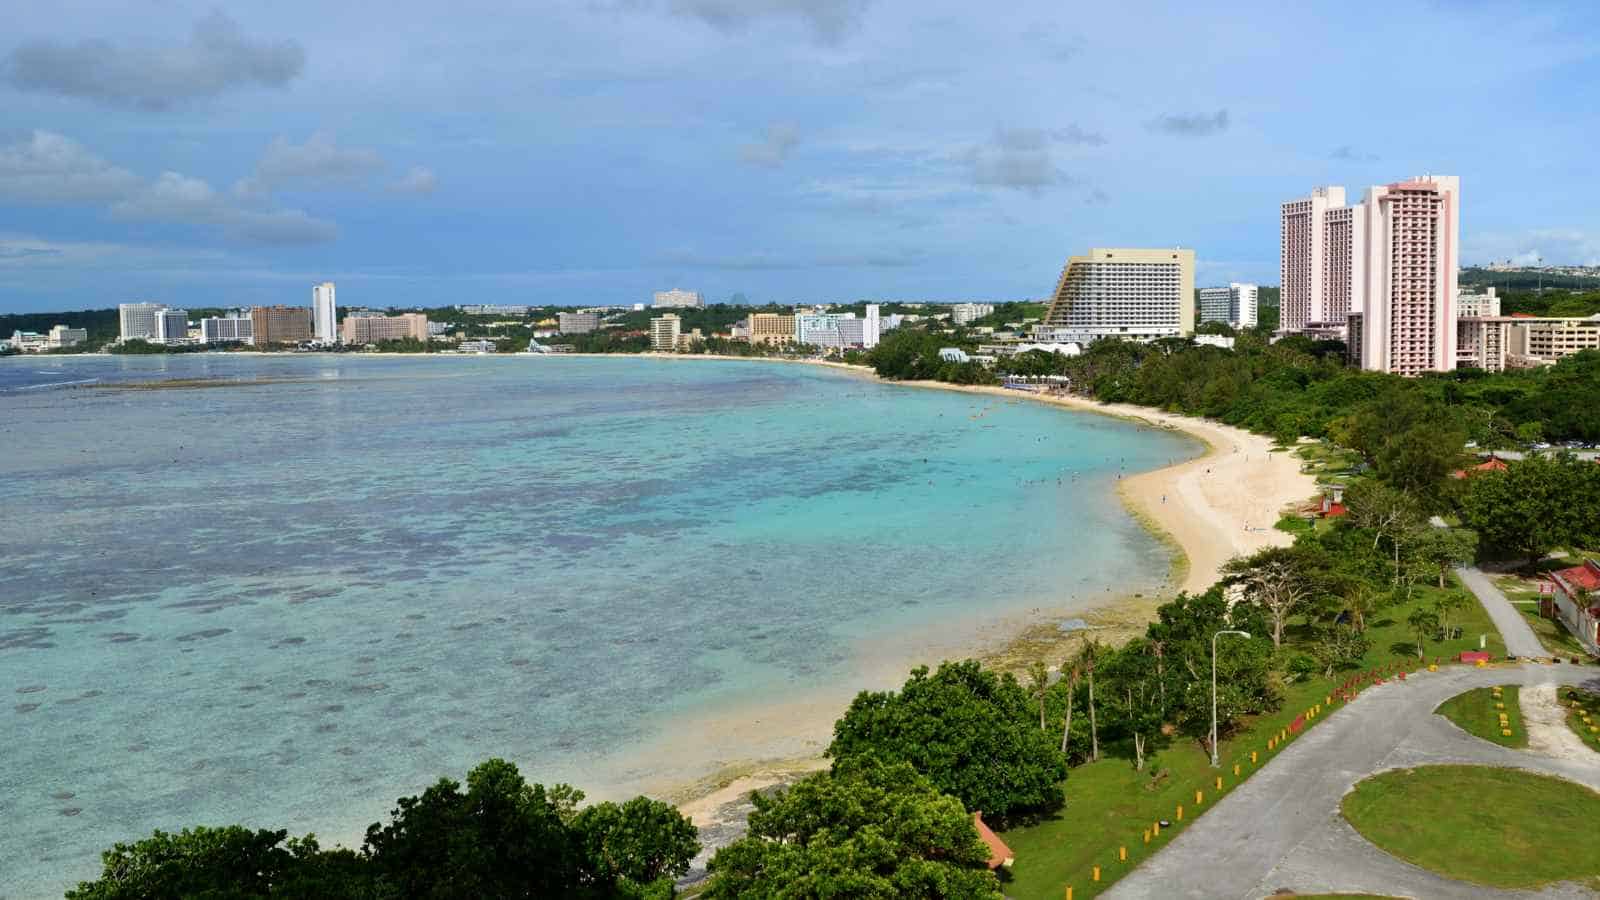 <p><span>Located in the western Pacific Ocean, Guam is an unincorporated territory of the United States. This tropical island boasts stunning beaches, diverse marine life, and a rich history influenced by Spanish, Japanese, and American cultures. US citizens can visit Guam without a passport for up to 45 days.</span></p>